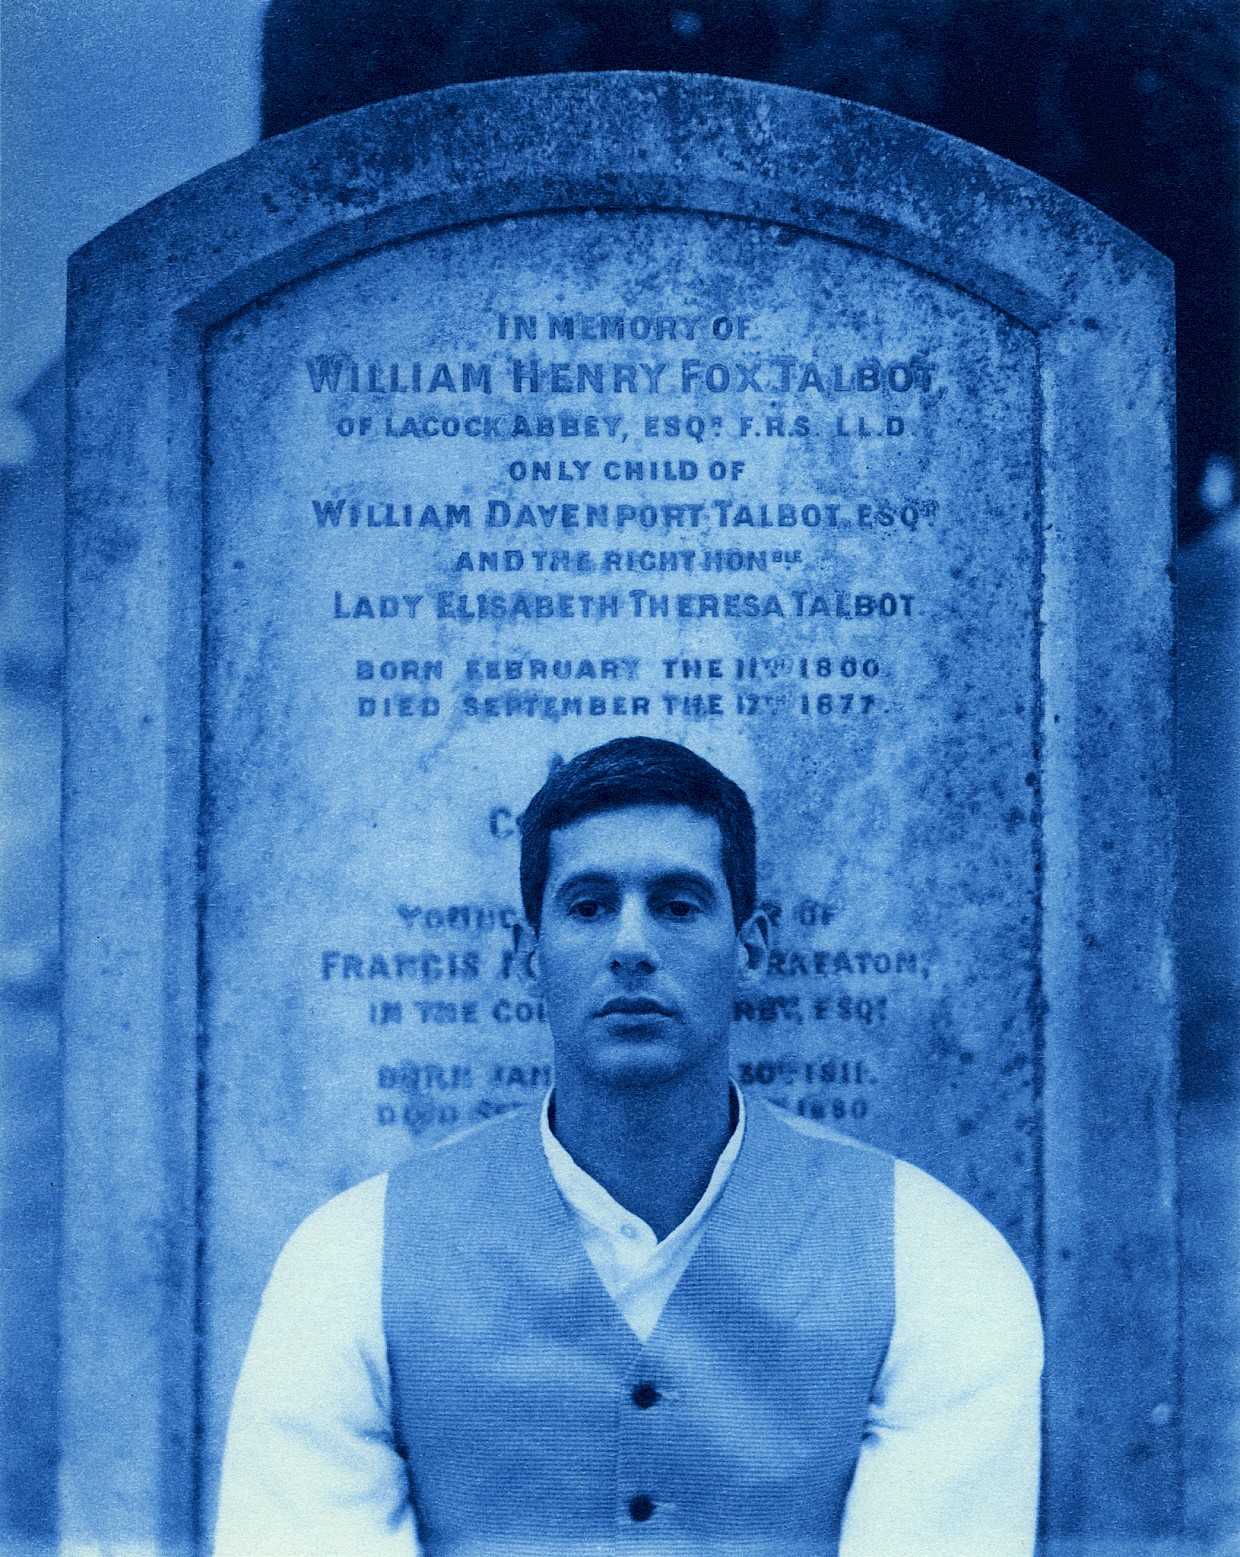 John Dugdale in front of Fox Talbot tombstone